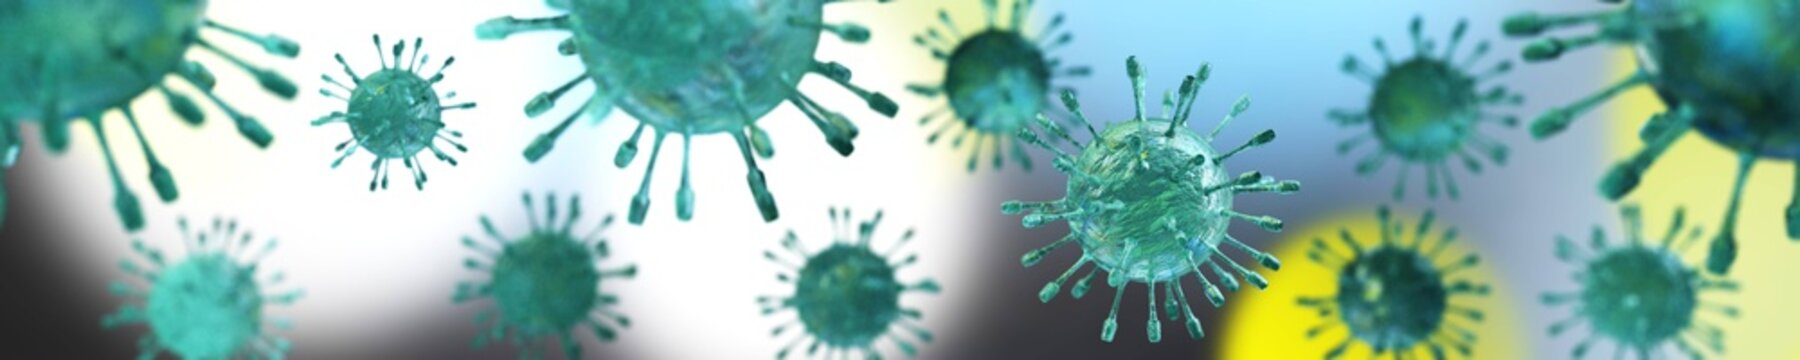 Virus infection close-up, virus close-up, 3d rendering